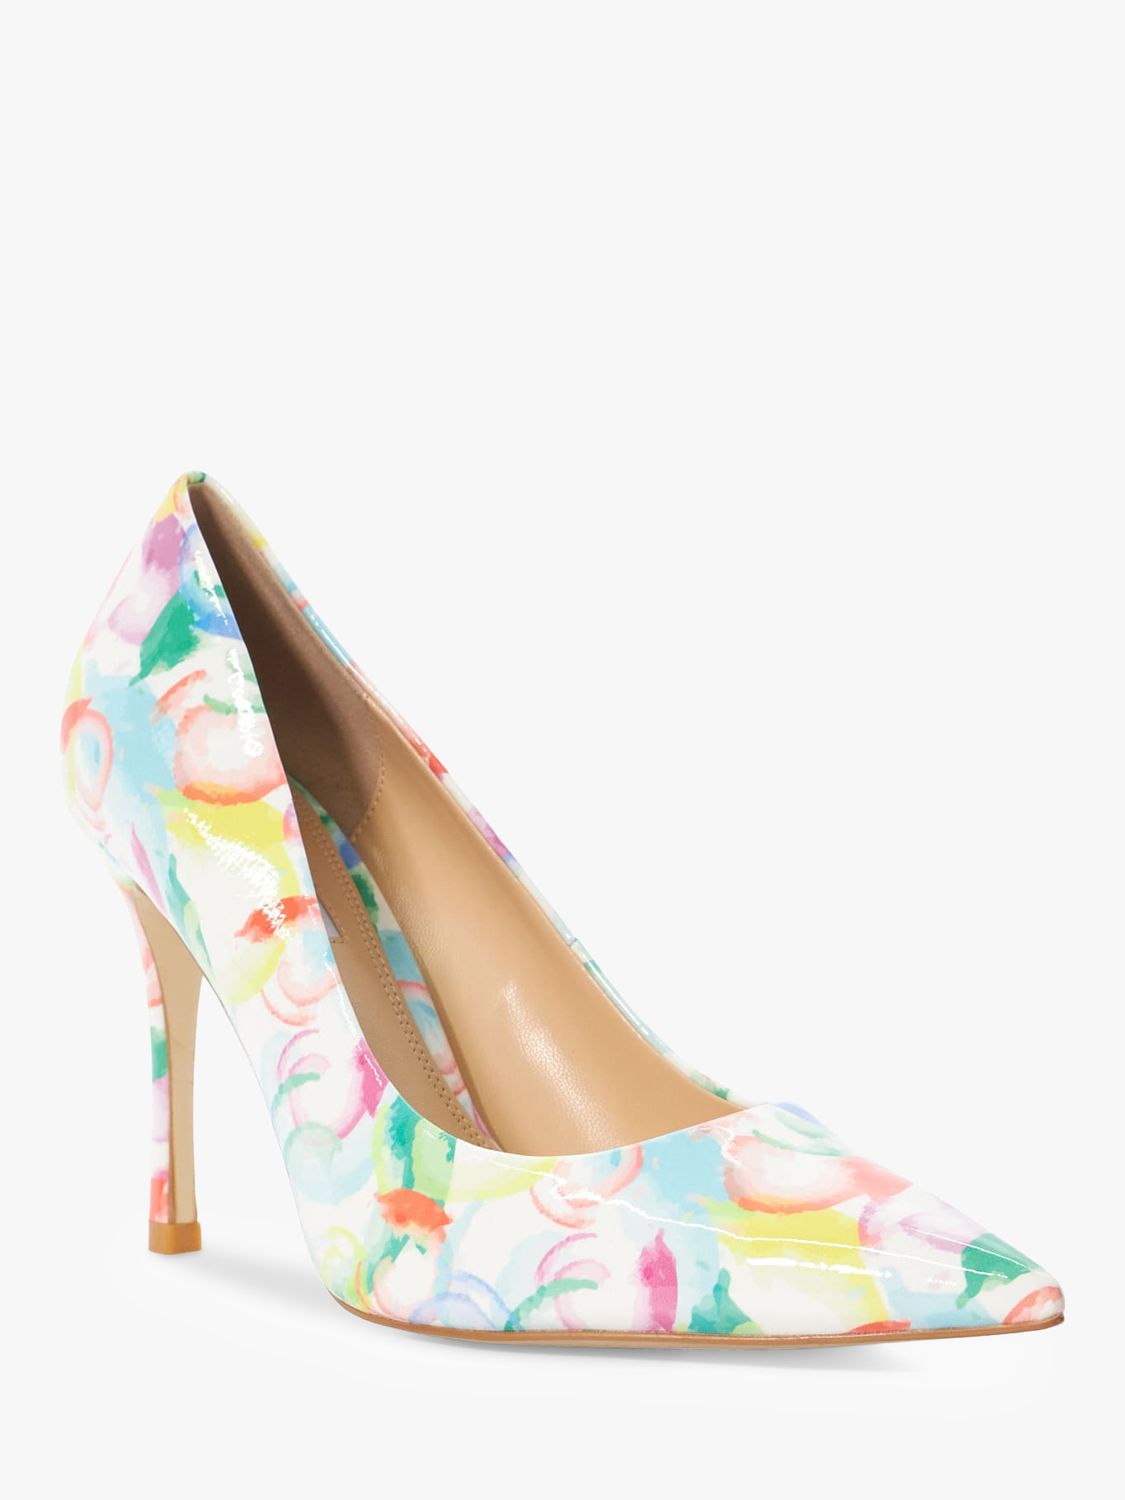 Buy Dune Advert Bubble Print Patent High Heeled Court Shoes, Multi Online at johnlewis.com